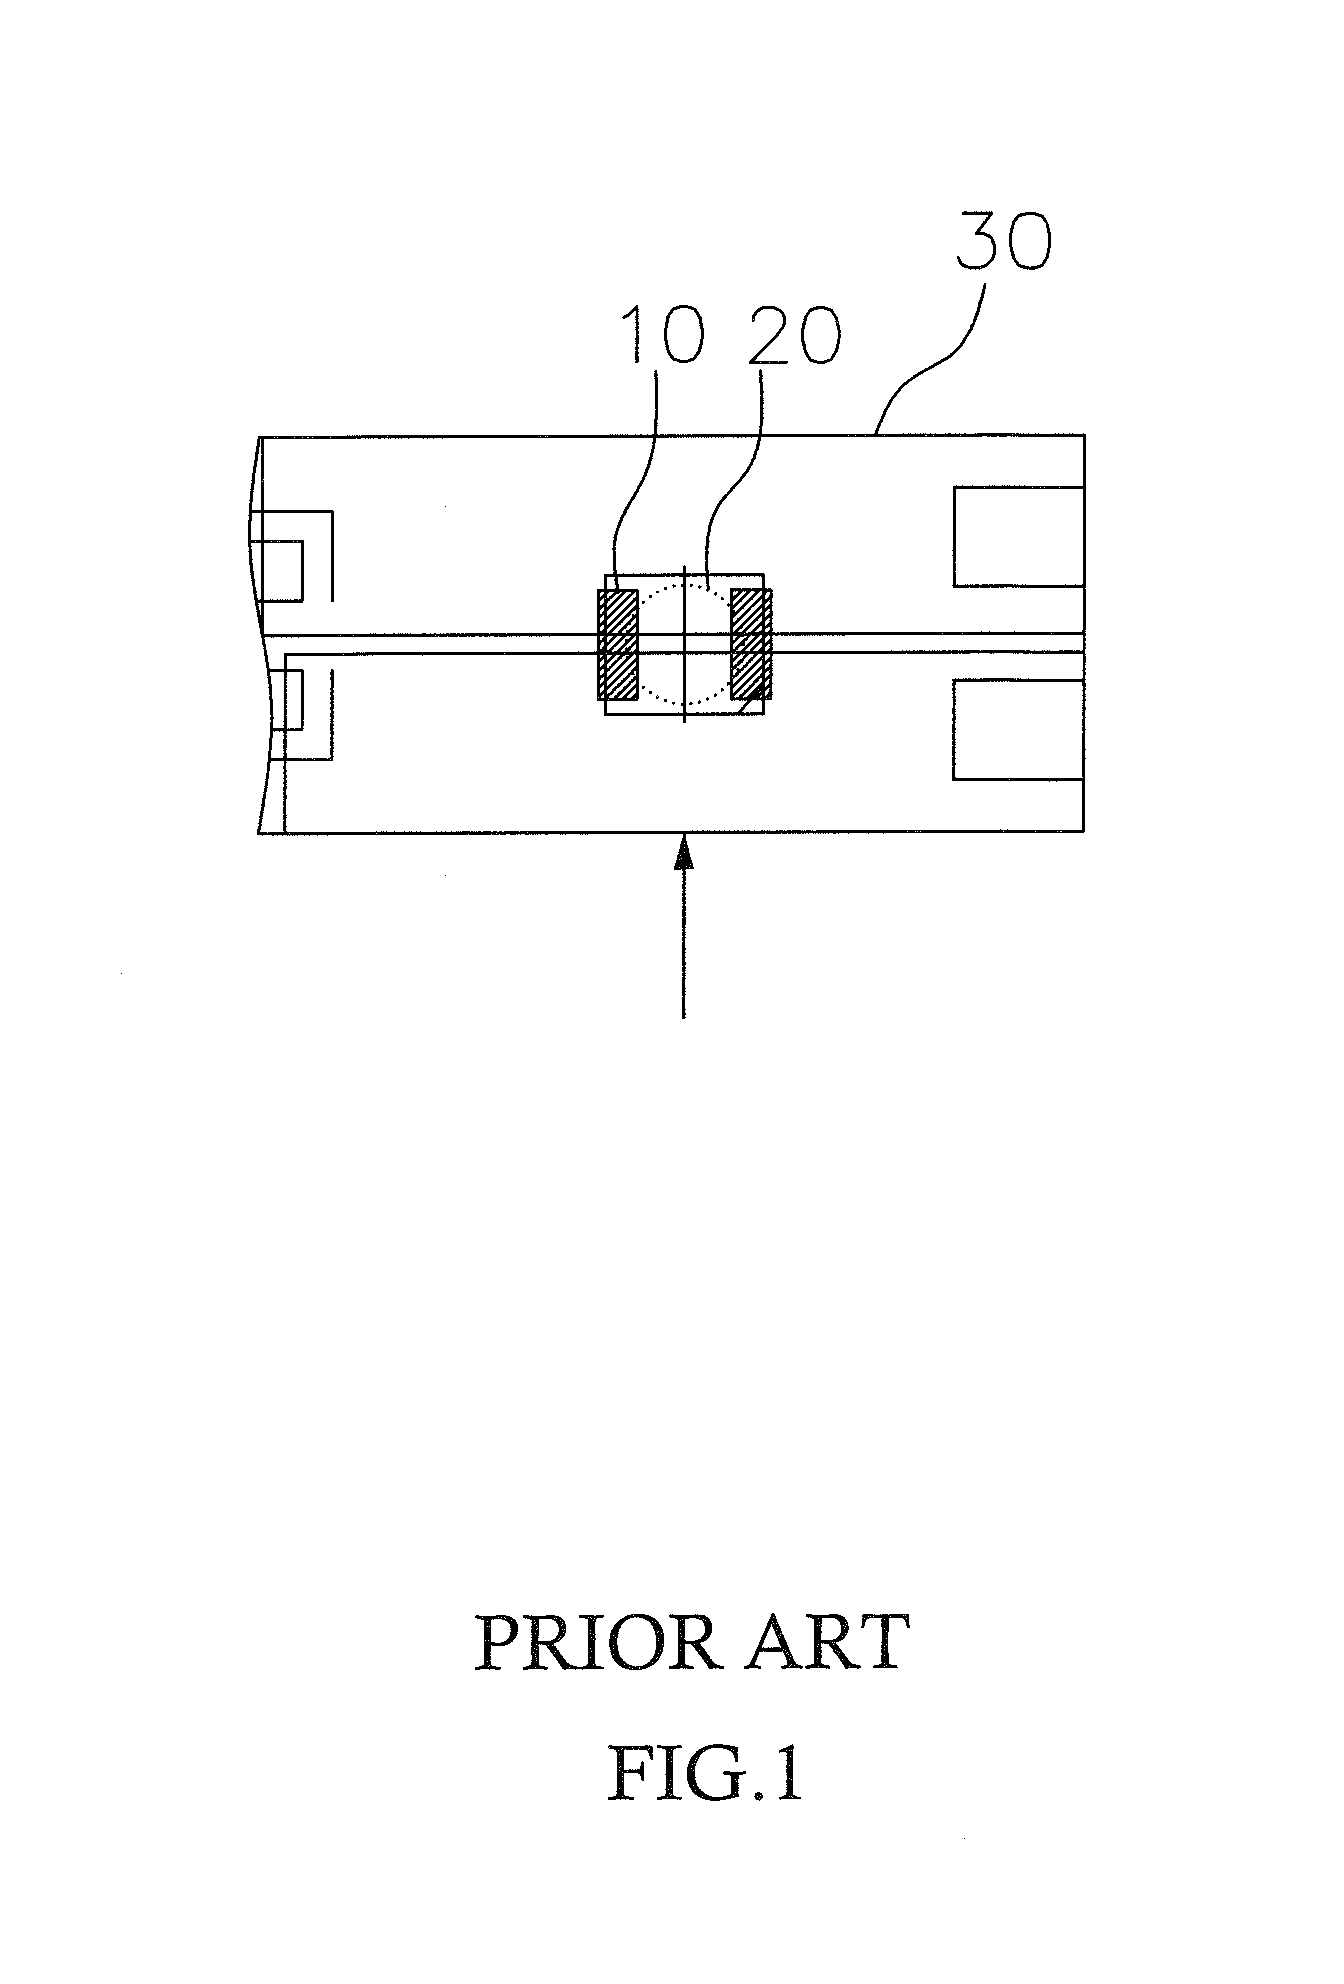 Flexible LED light bar and manufacturing method thereof